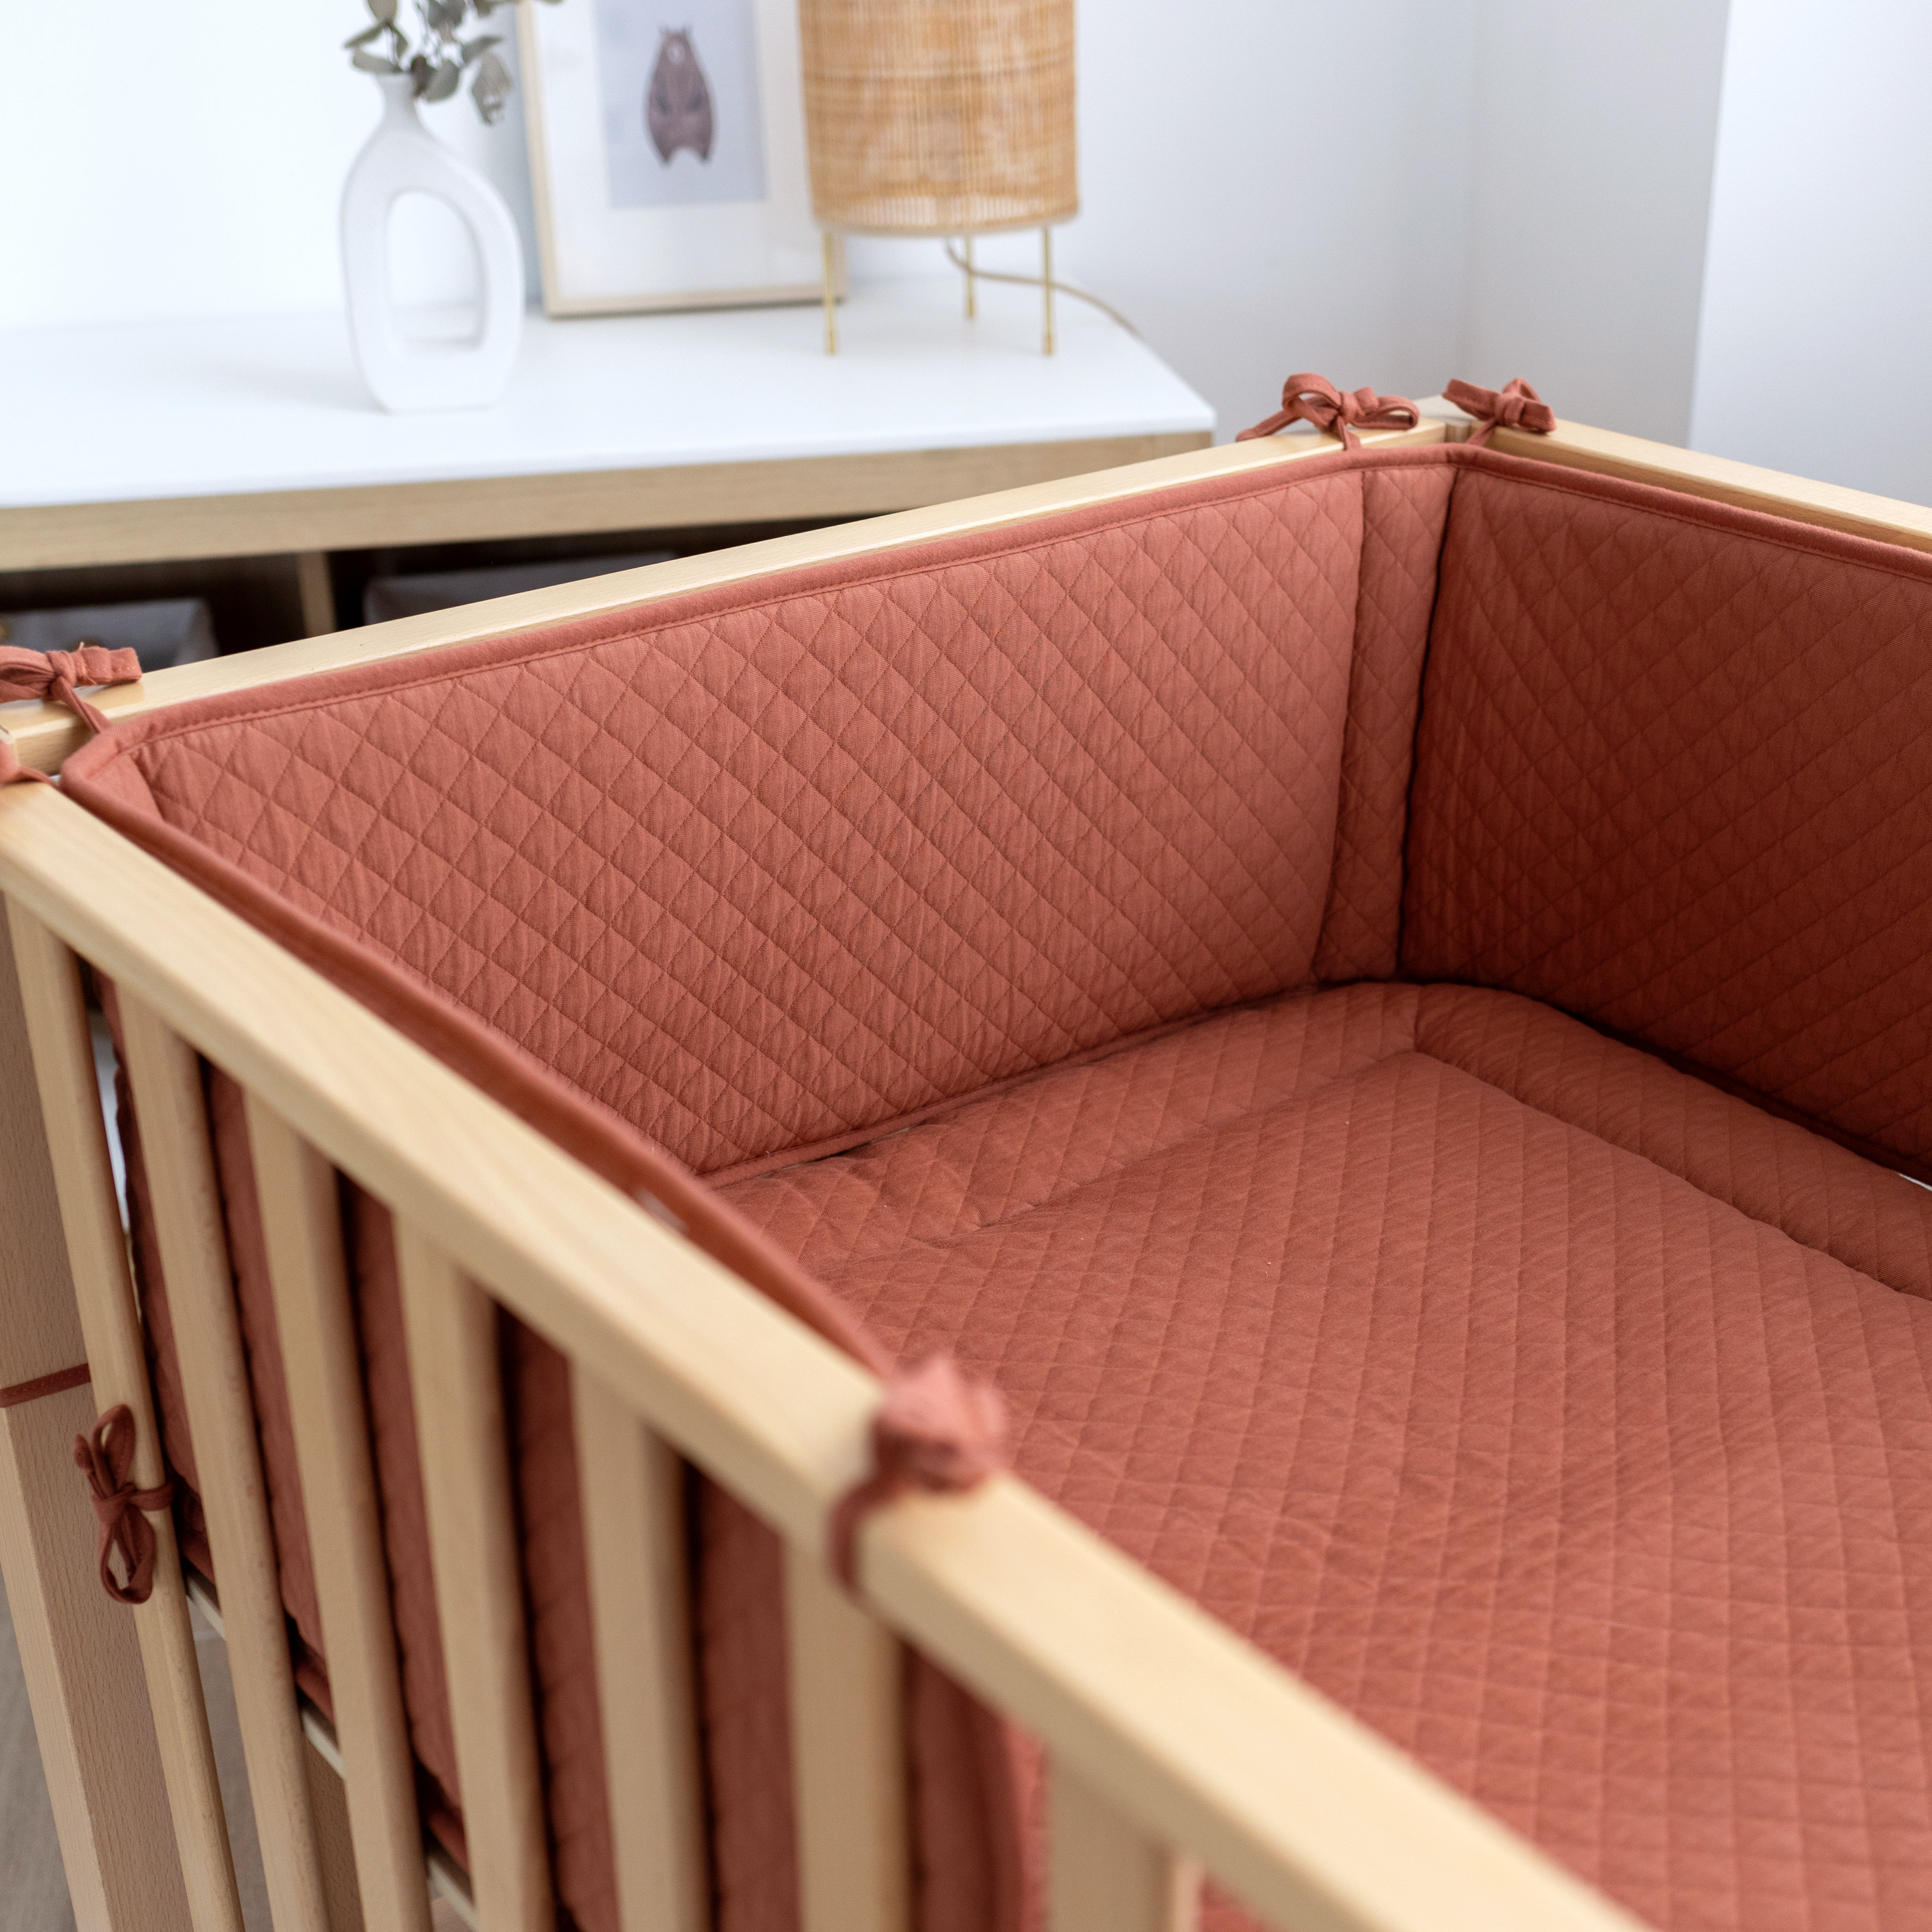 Bed & playpen bumper Pady quilted jersey 30x180cm QUILT Brick